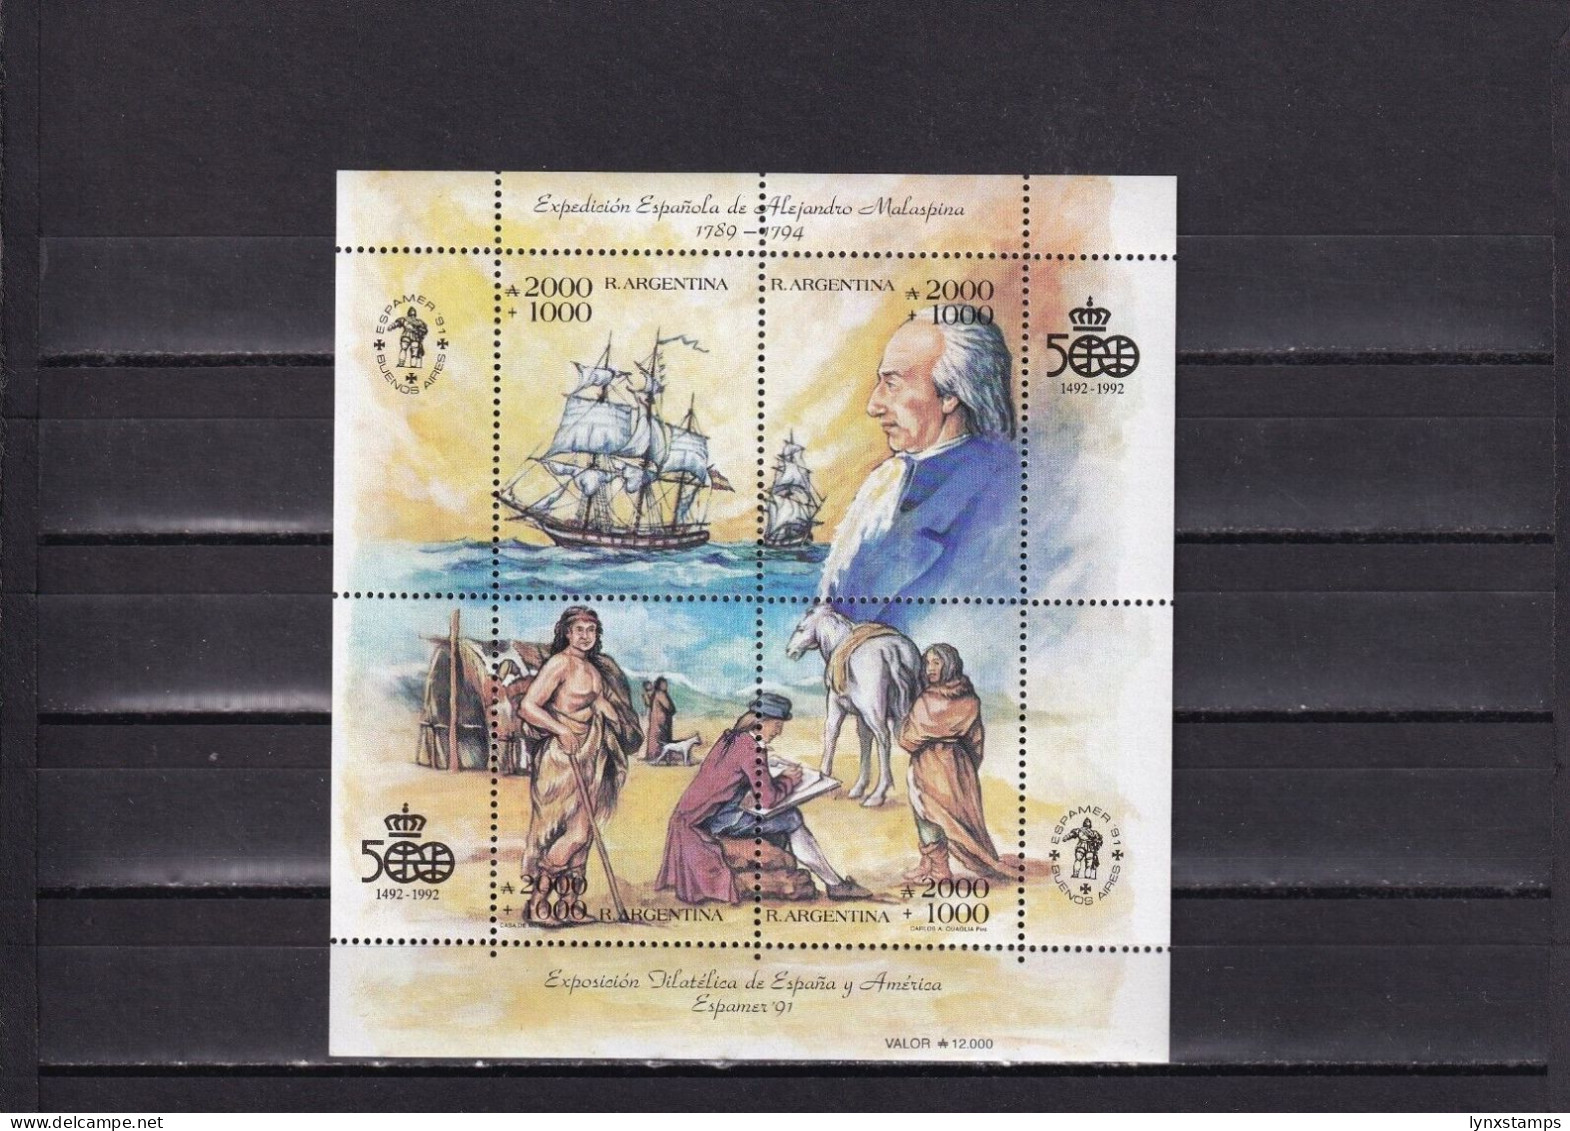 SA04 Argentina 1990 Stamp Exhibition ESPAMER '91 500th Anniv Discovery America - Unused Stamps